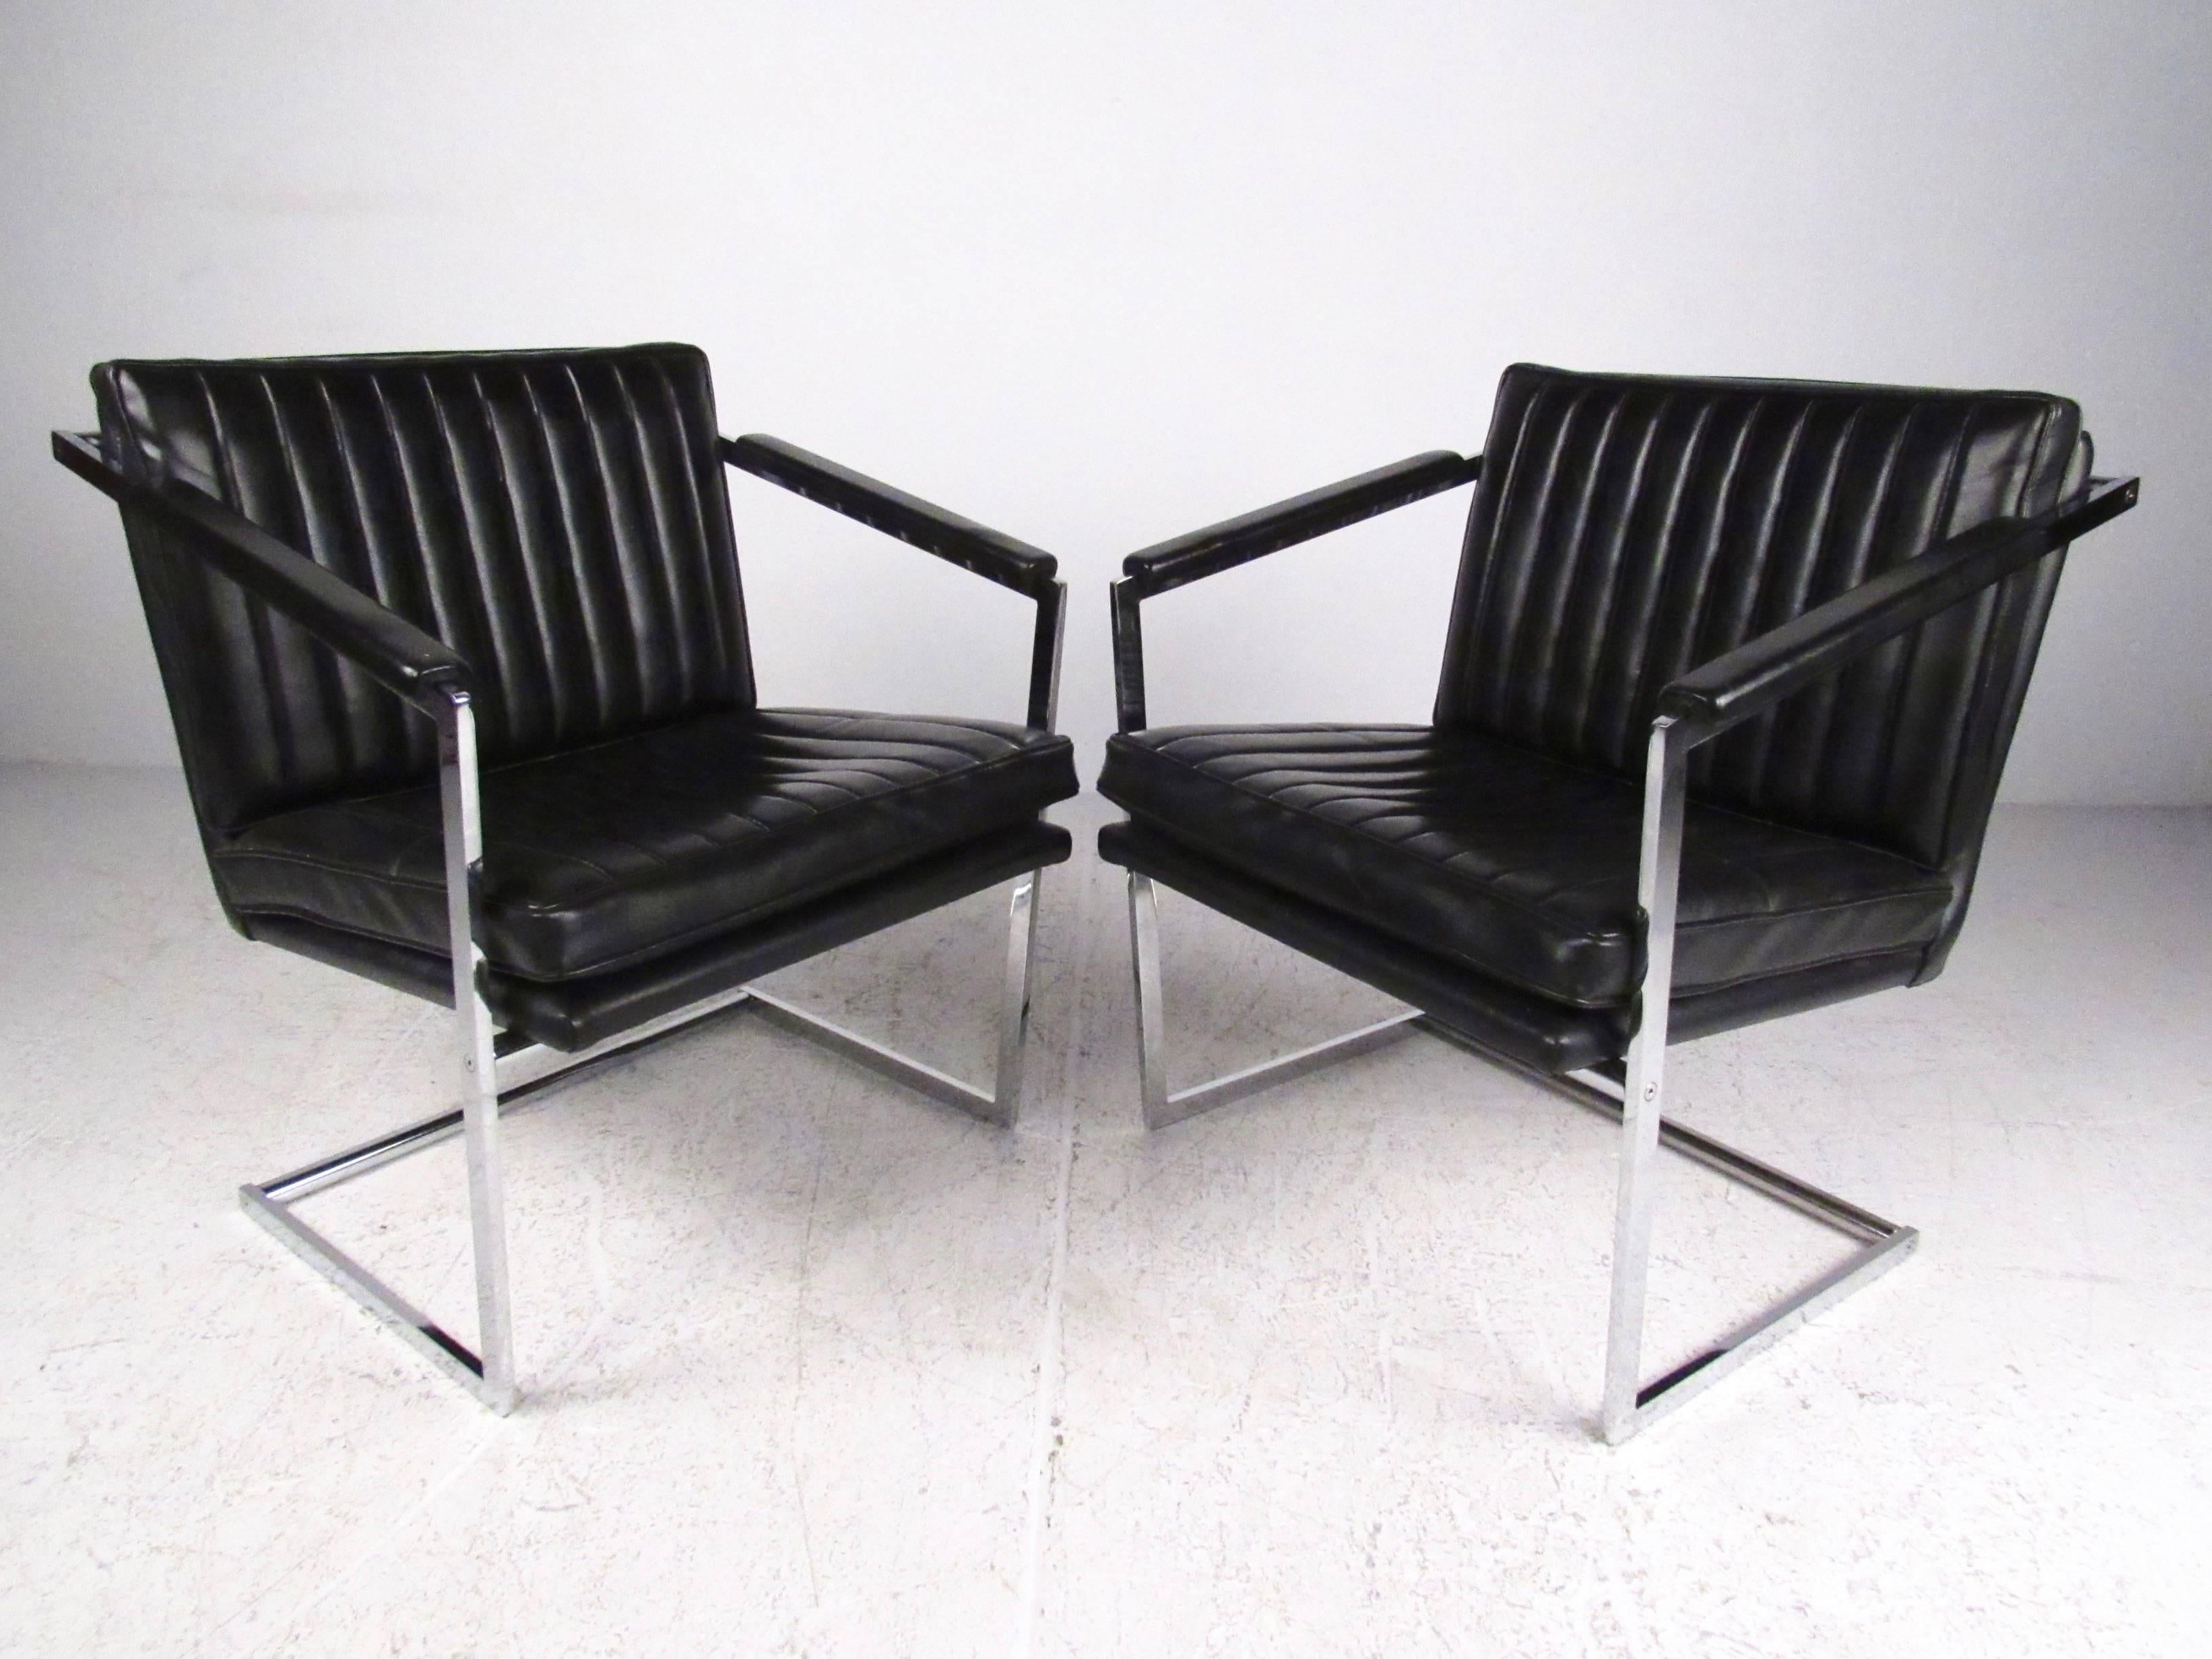 This pair of vintage chrome side chairs features sloped upholstered arms and plush upholstered seats. The stylish modern appeal of this well-crafted pair of arm chairs make this vinyl and heavy chrome set the perfect addition to home office seating.